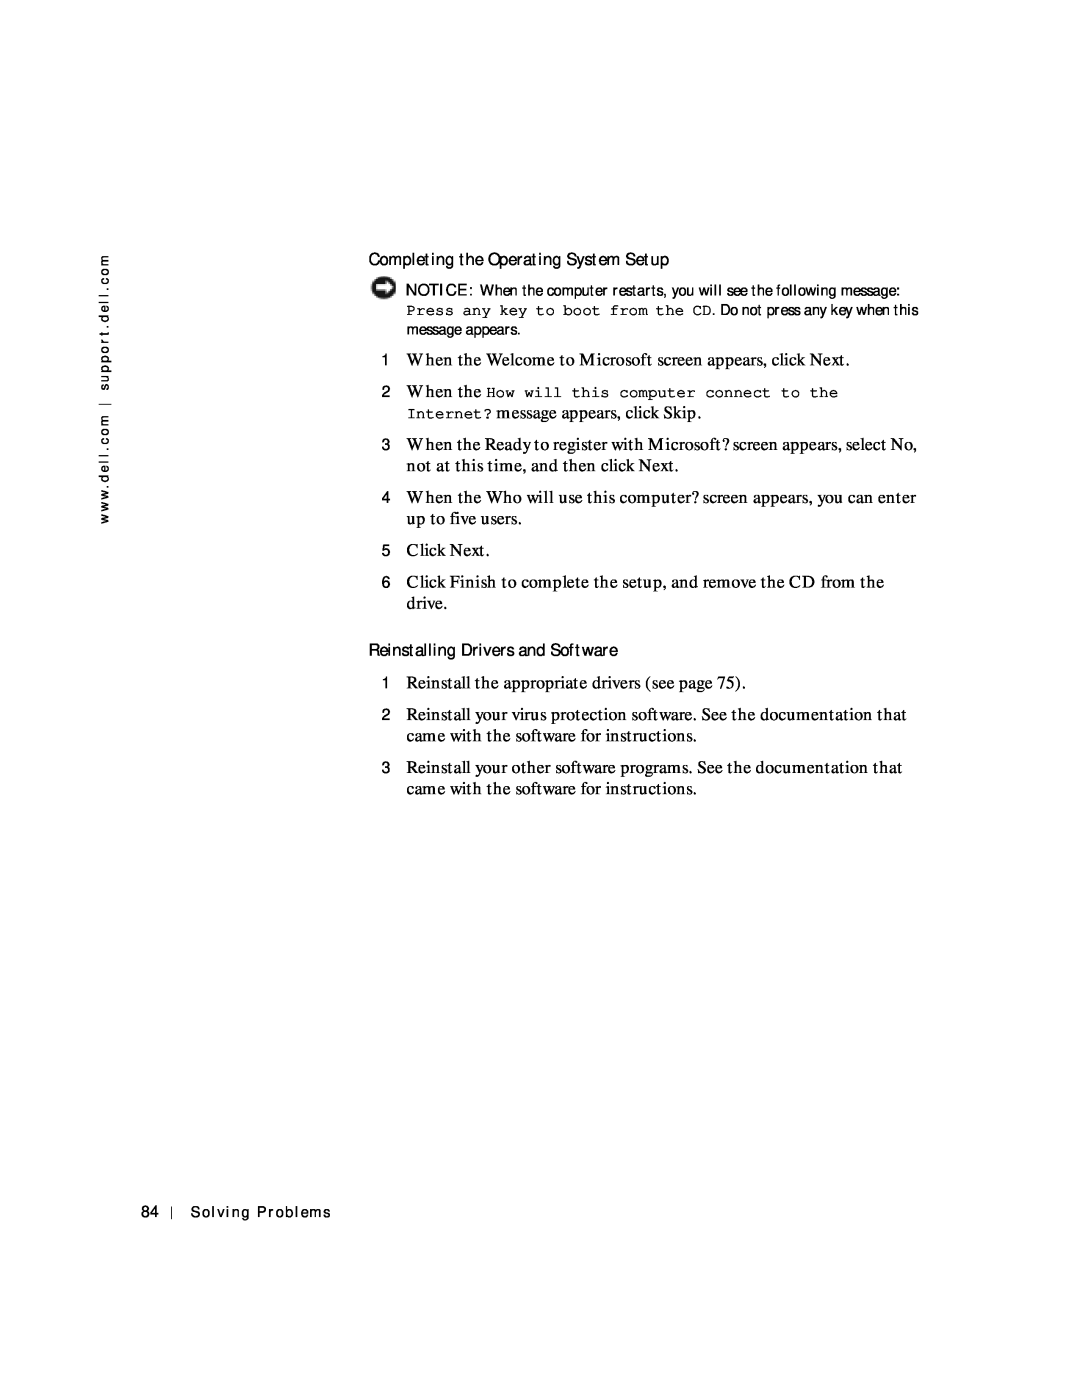 Dell 4150 owner manual Completing the Operating System Setup, Reinstalling Drivers and Software 